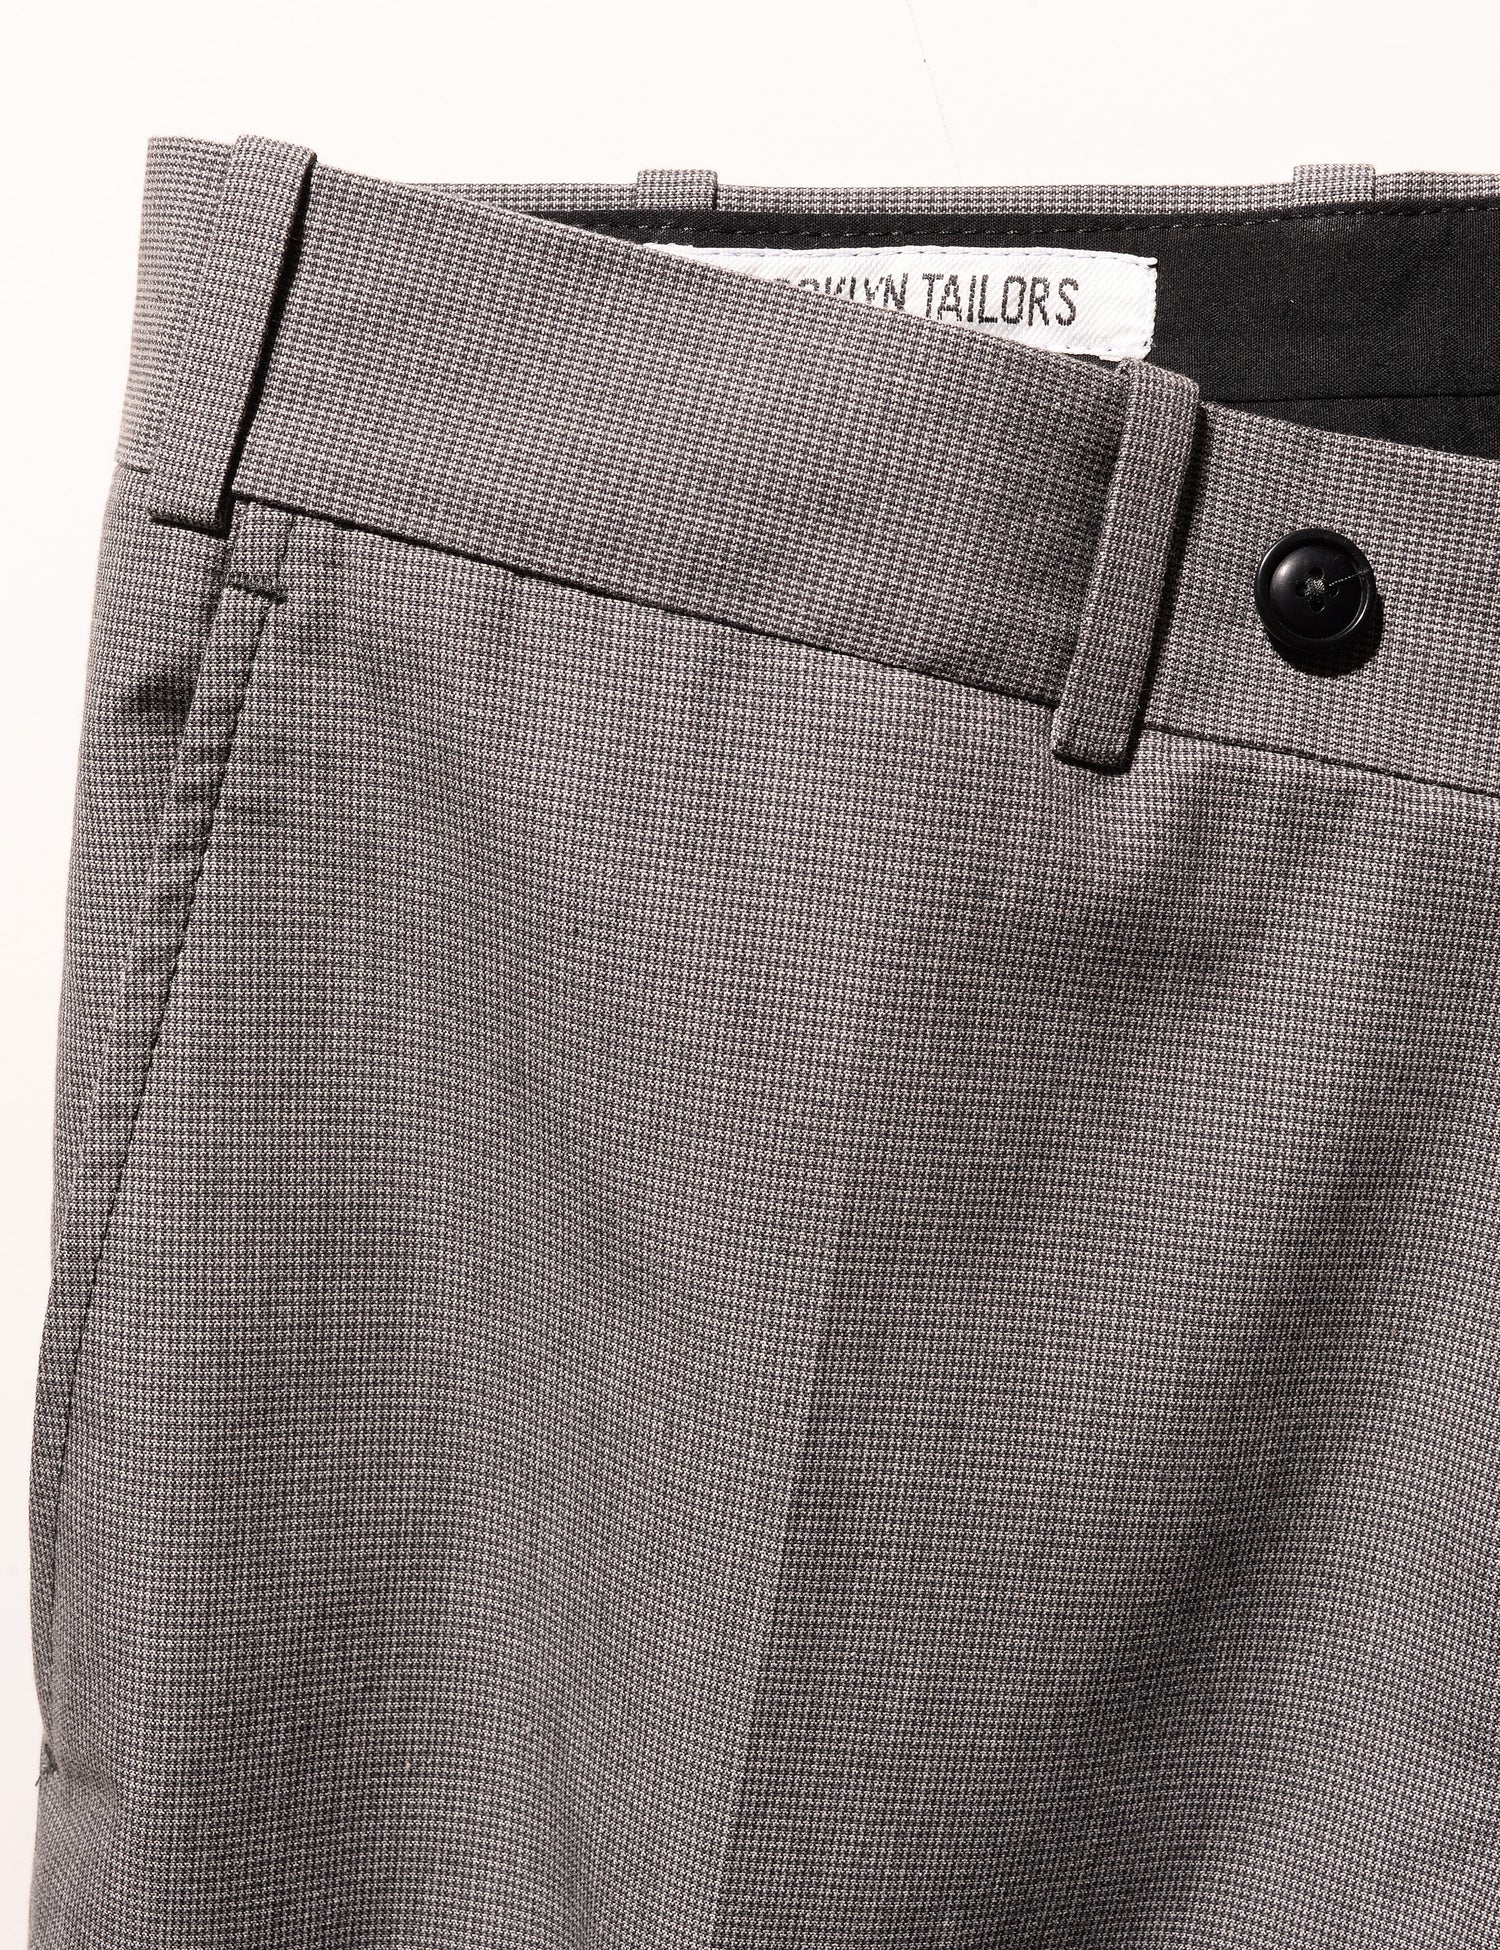 FINAL SALE: BKT50 Tailored Trousers in Cotton Micro Weave